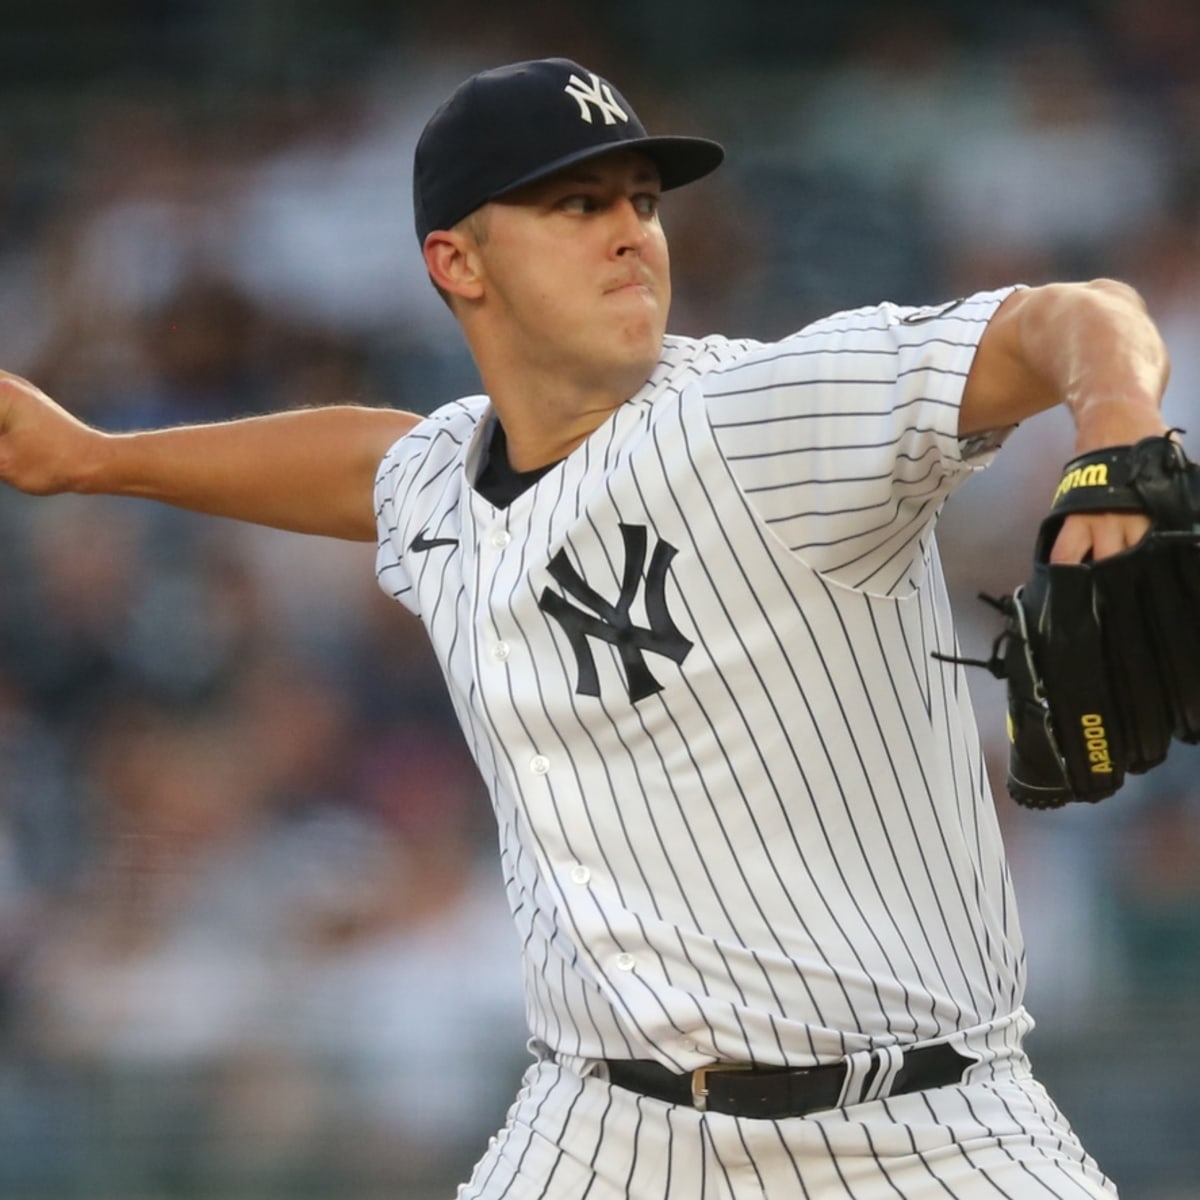 Yankees SP Jameson Taillon starts rehab after ankle surgery